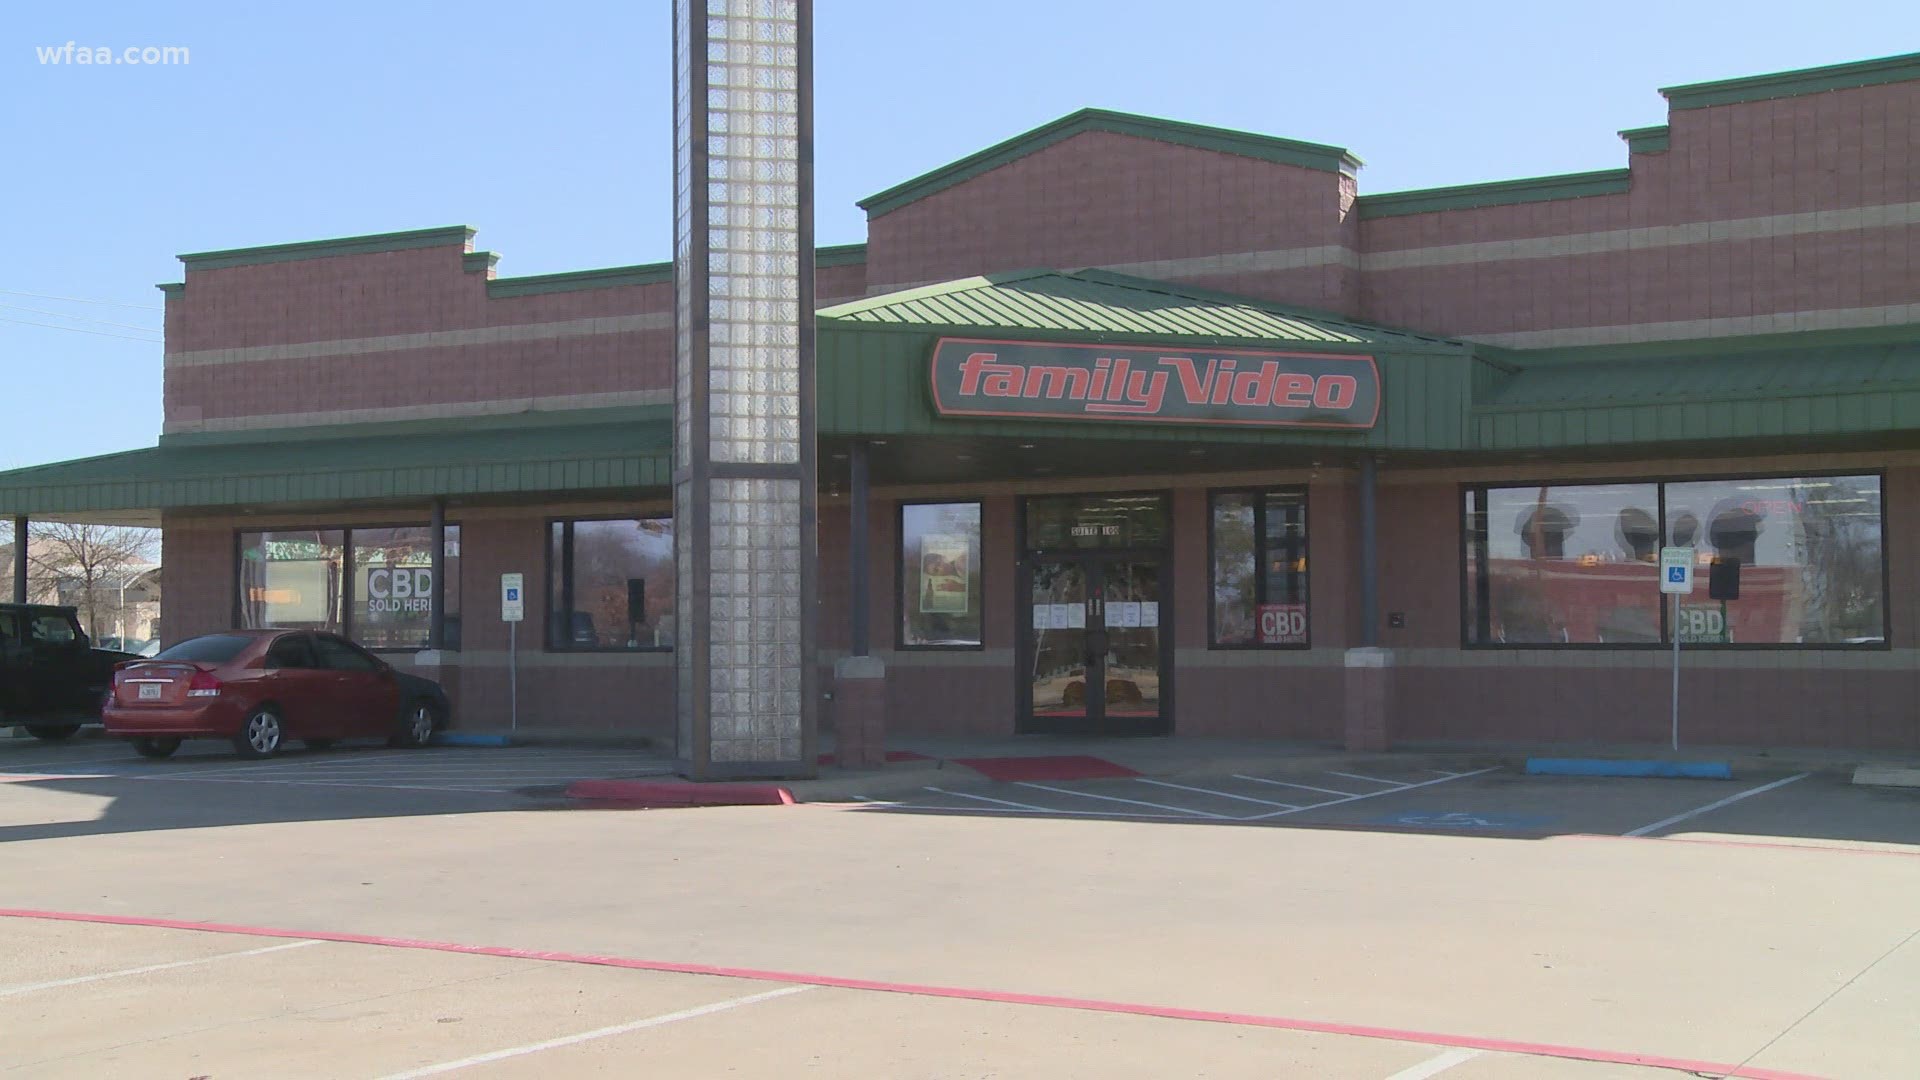 Most of the big chain stores closed years ago. Except for Family Video. Now, the seven locations that still exist in North Texas, are selling everything.